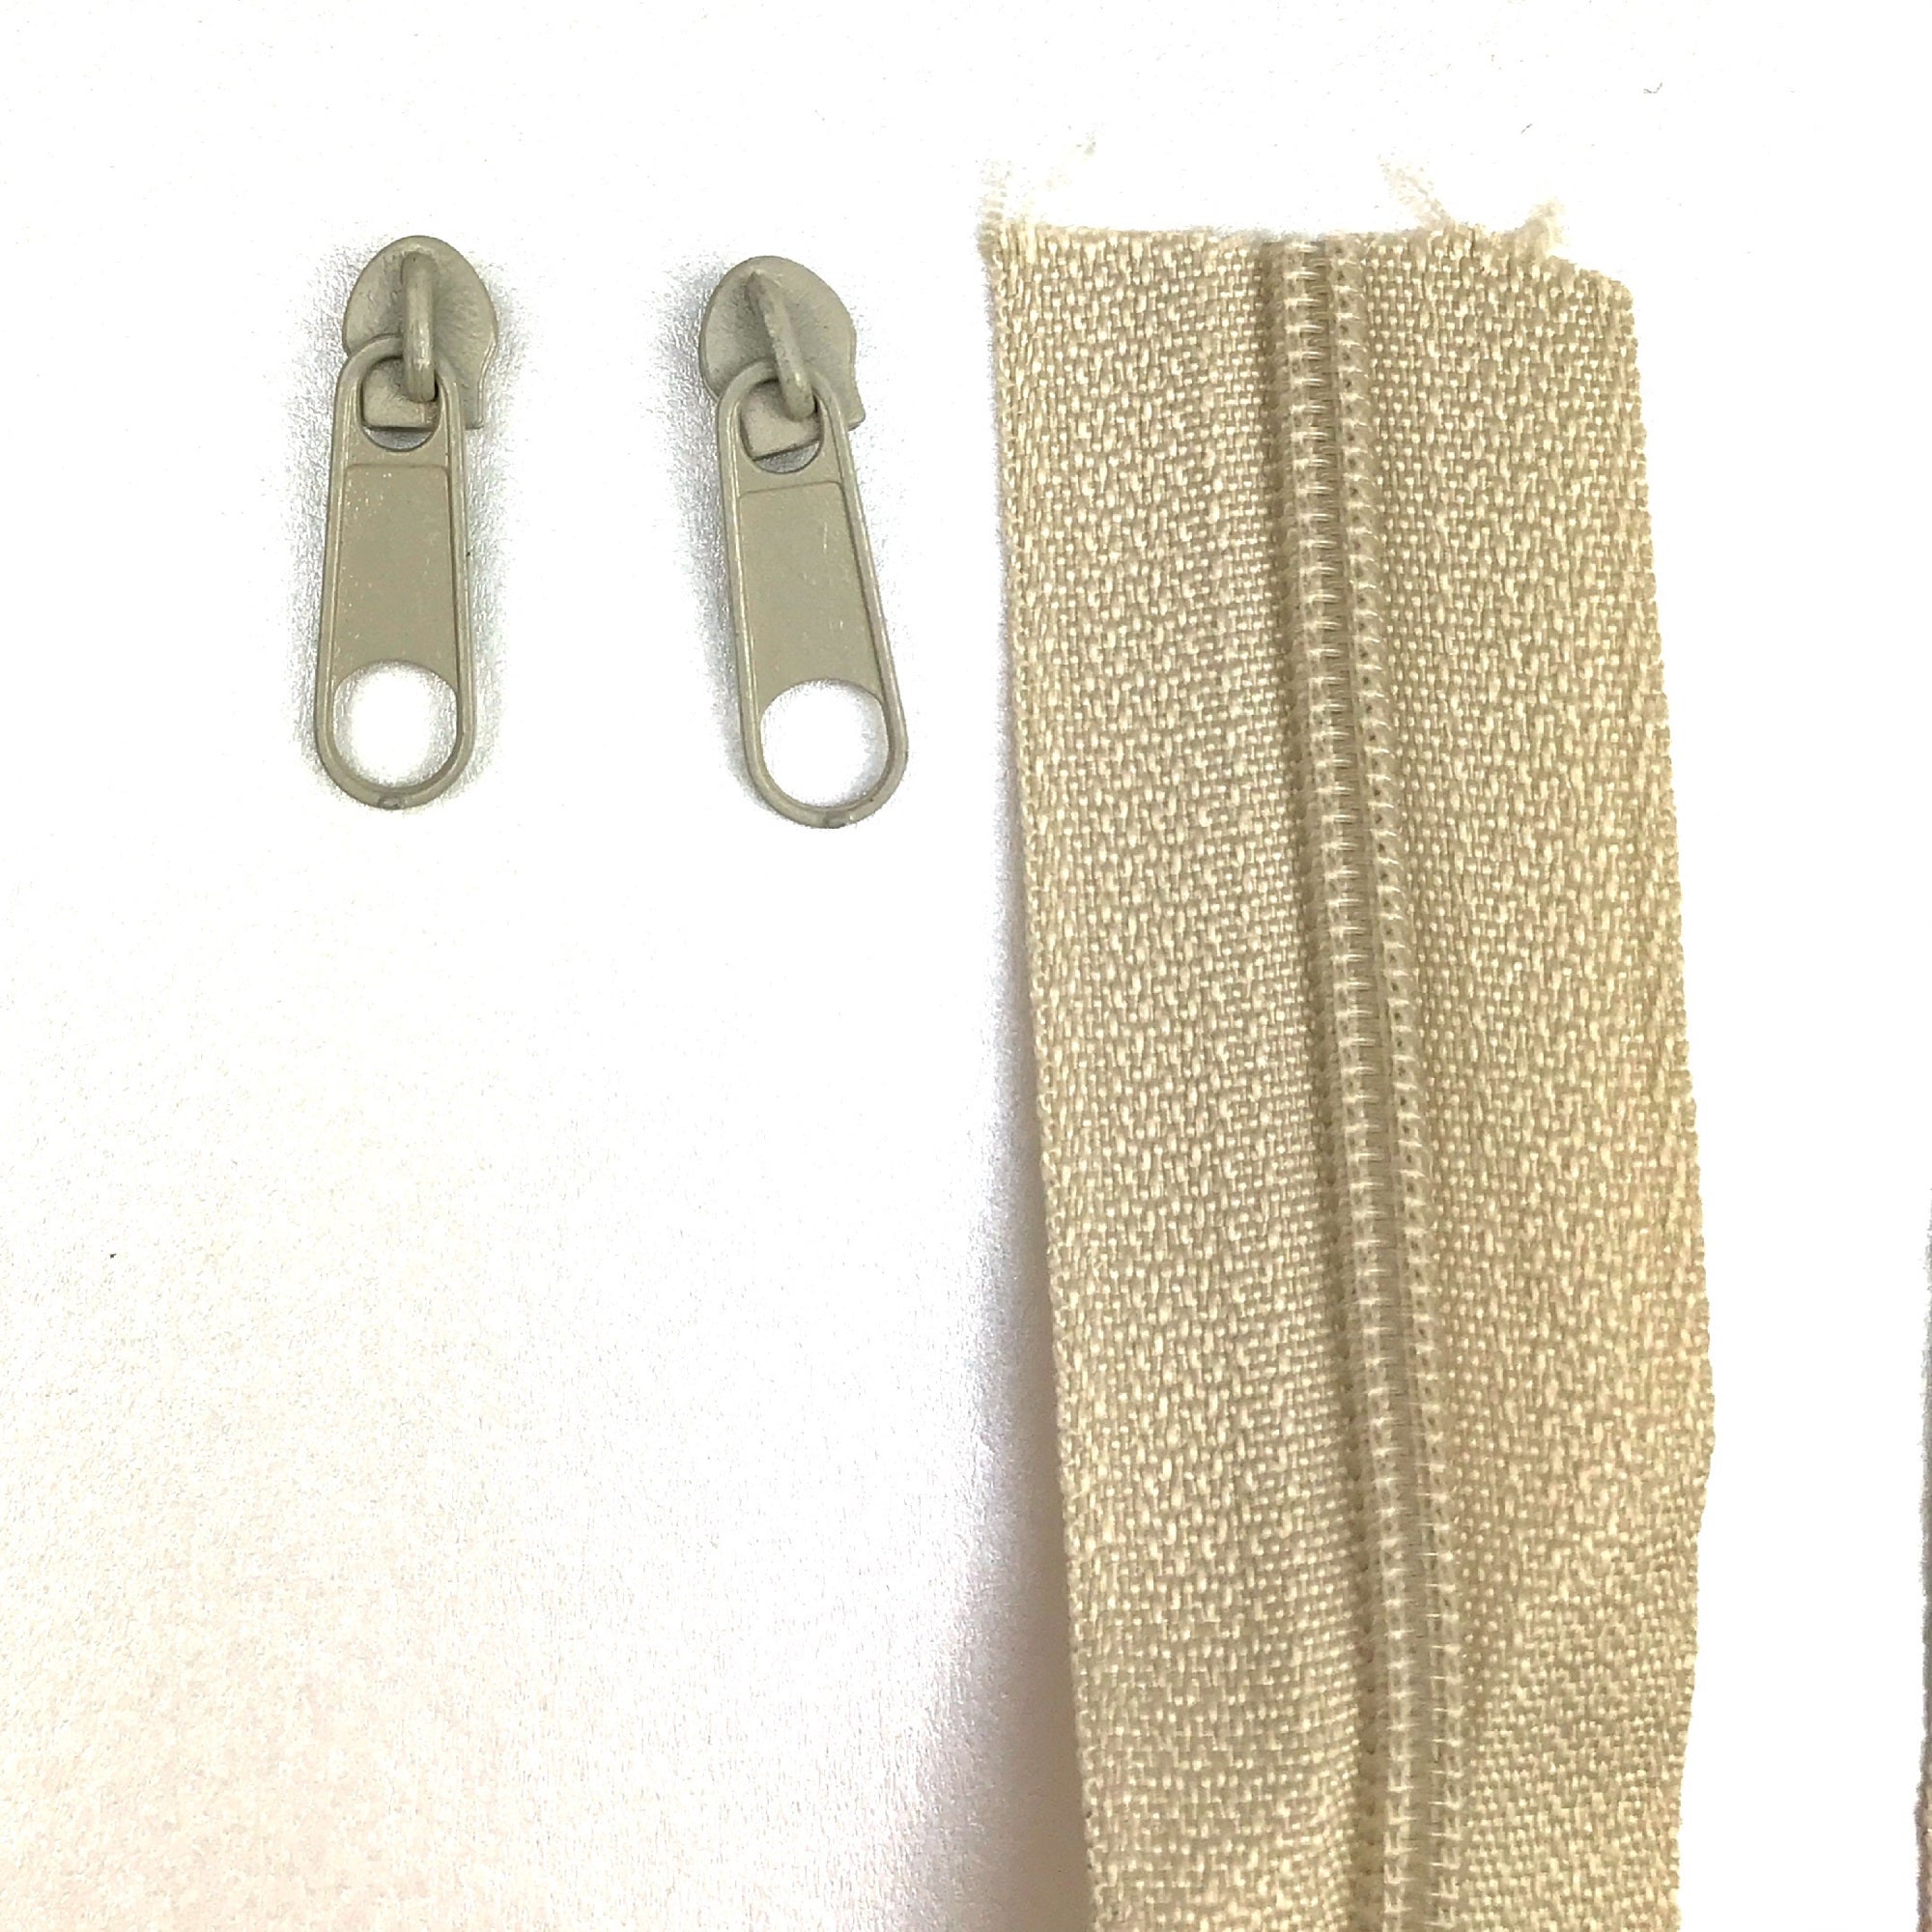 Beige Continuous standard zipper tape and sliders with pullers: Versatile zipper components designed for various applications. The continuous tape allows for customizable lengths, while the sliders and pullers ensure smooth operation and secure closure. Ideal for a wide range of projects, from apparel to accessories, offering functionality and durability. Upgrade your designs with dependable standard zipper tape and sliders complete with convenient pullers